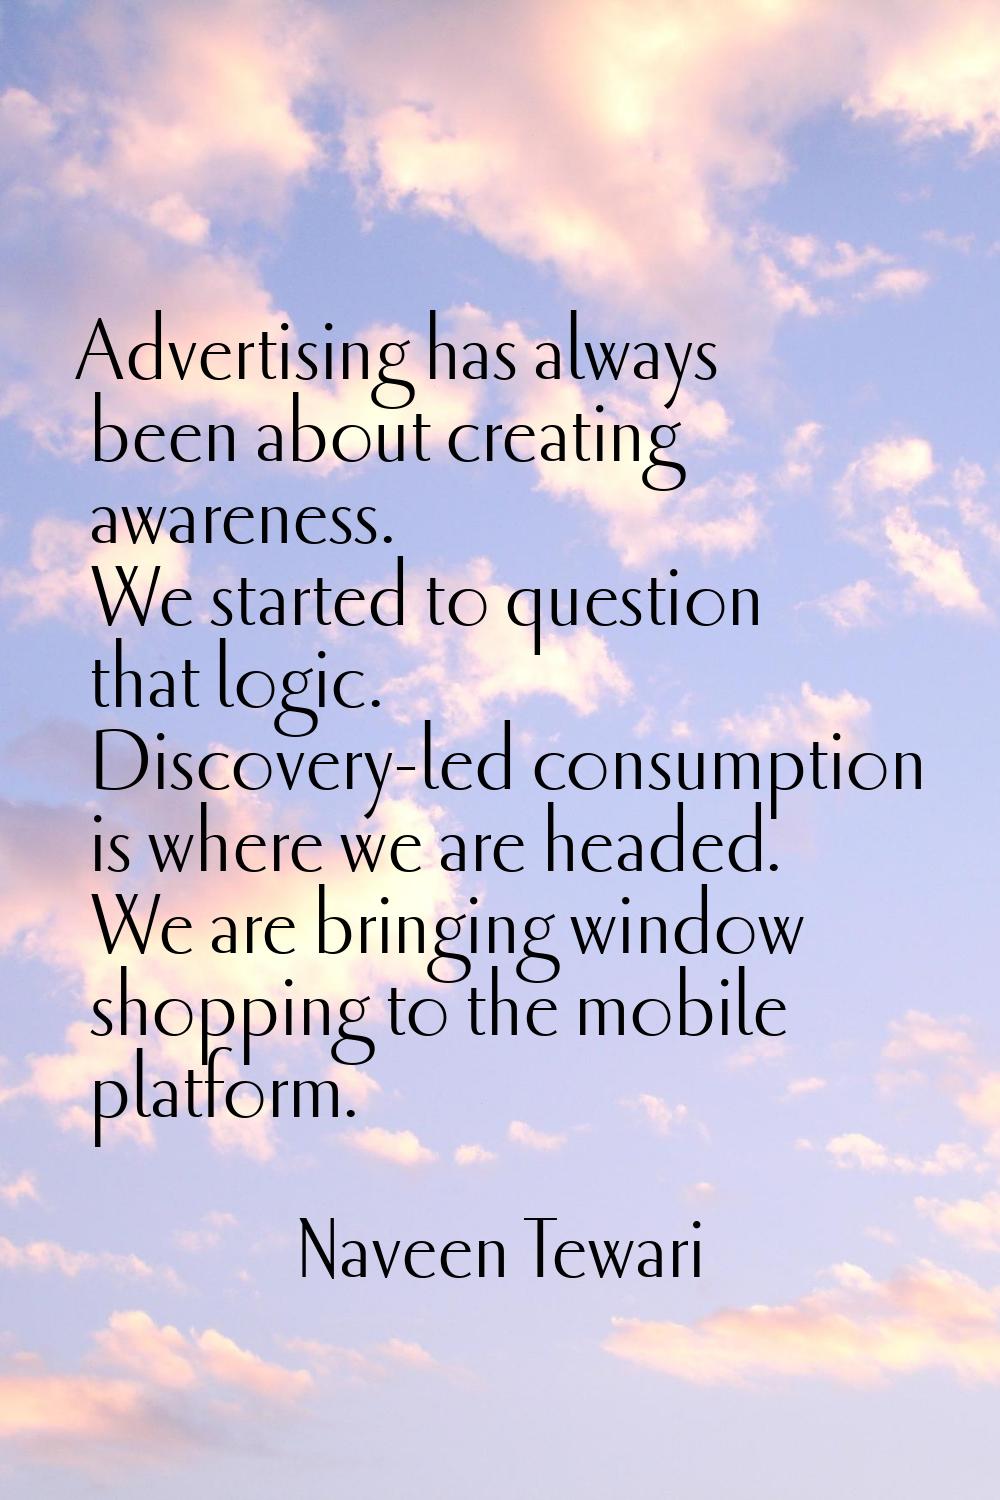 Advertising has always been about creating awareness. We started to question that logic. Discovery-